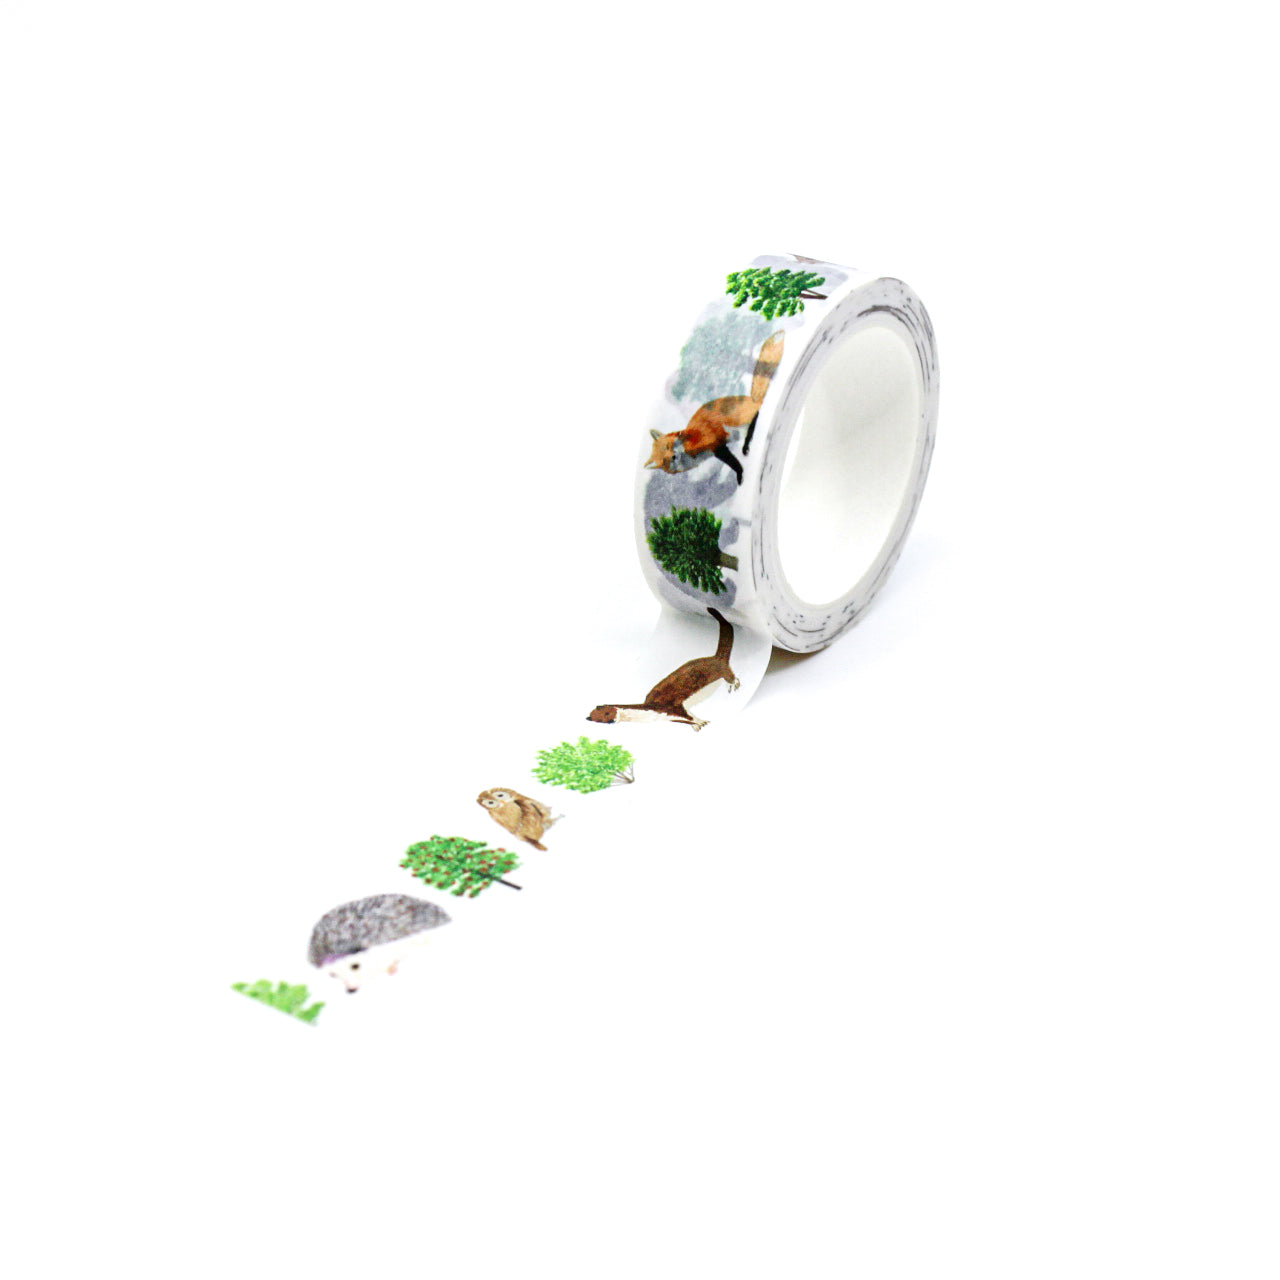 Embrace the charm of British woodland creatures with our British Wild Animal Woodland Creatures Washi Tape, adorned with delightful illustrations of native animals. Ideal for adding a touch of woodland wonder to your projects. This tape is designed by Sarah Francis and sold at BBB Supplies Craft Shop.